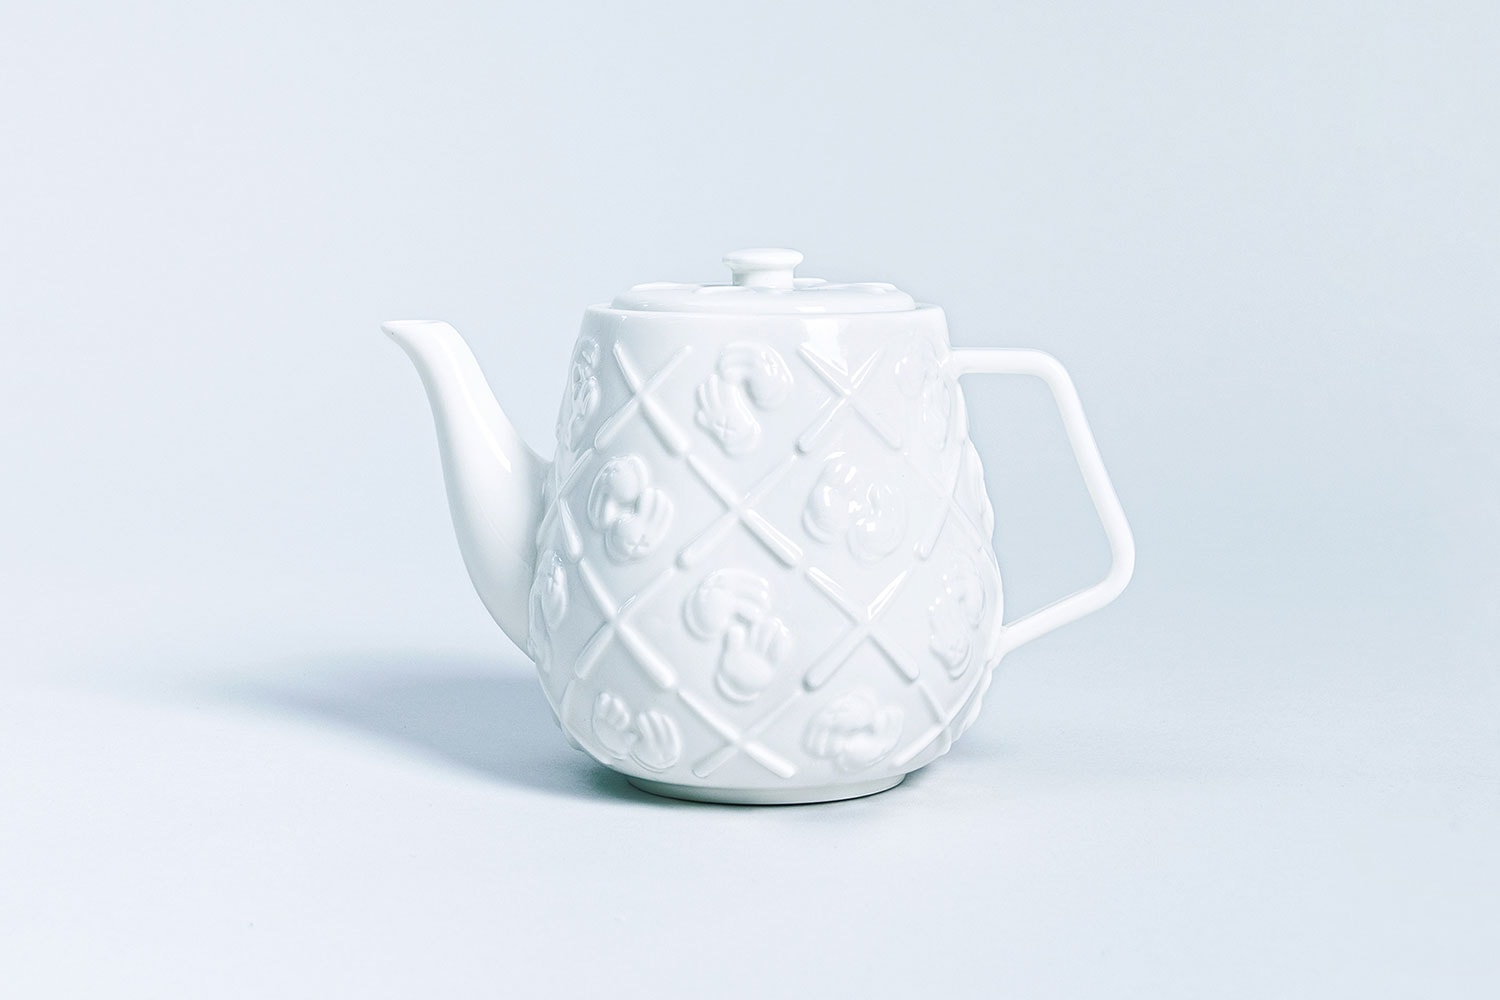 KAWS XX gloved hands Monogram Teapot AllRightsReserved collaboration ceramic white brew infusion